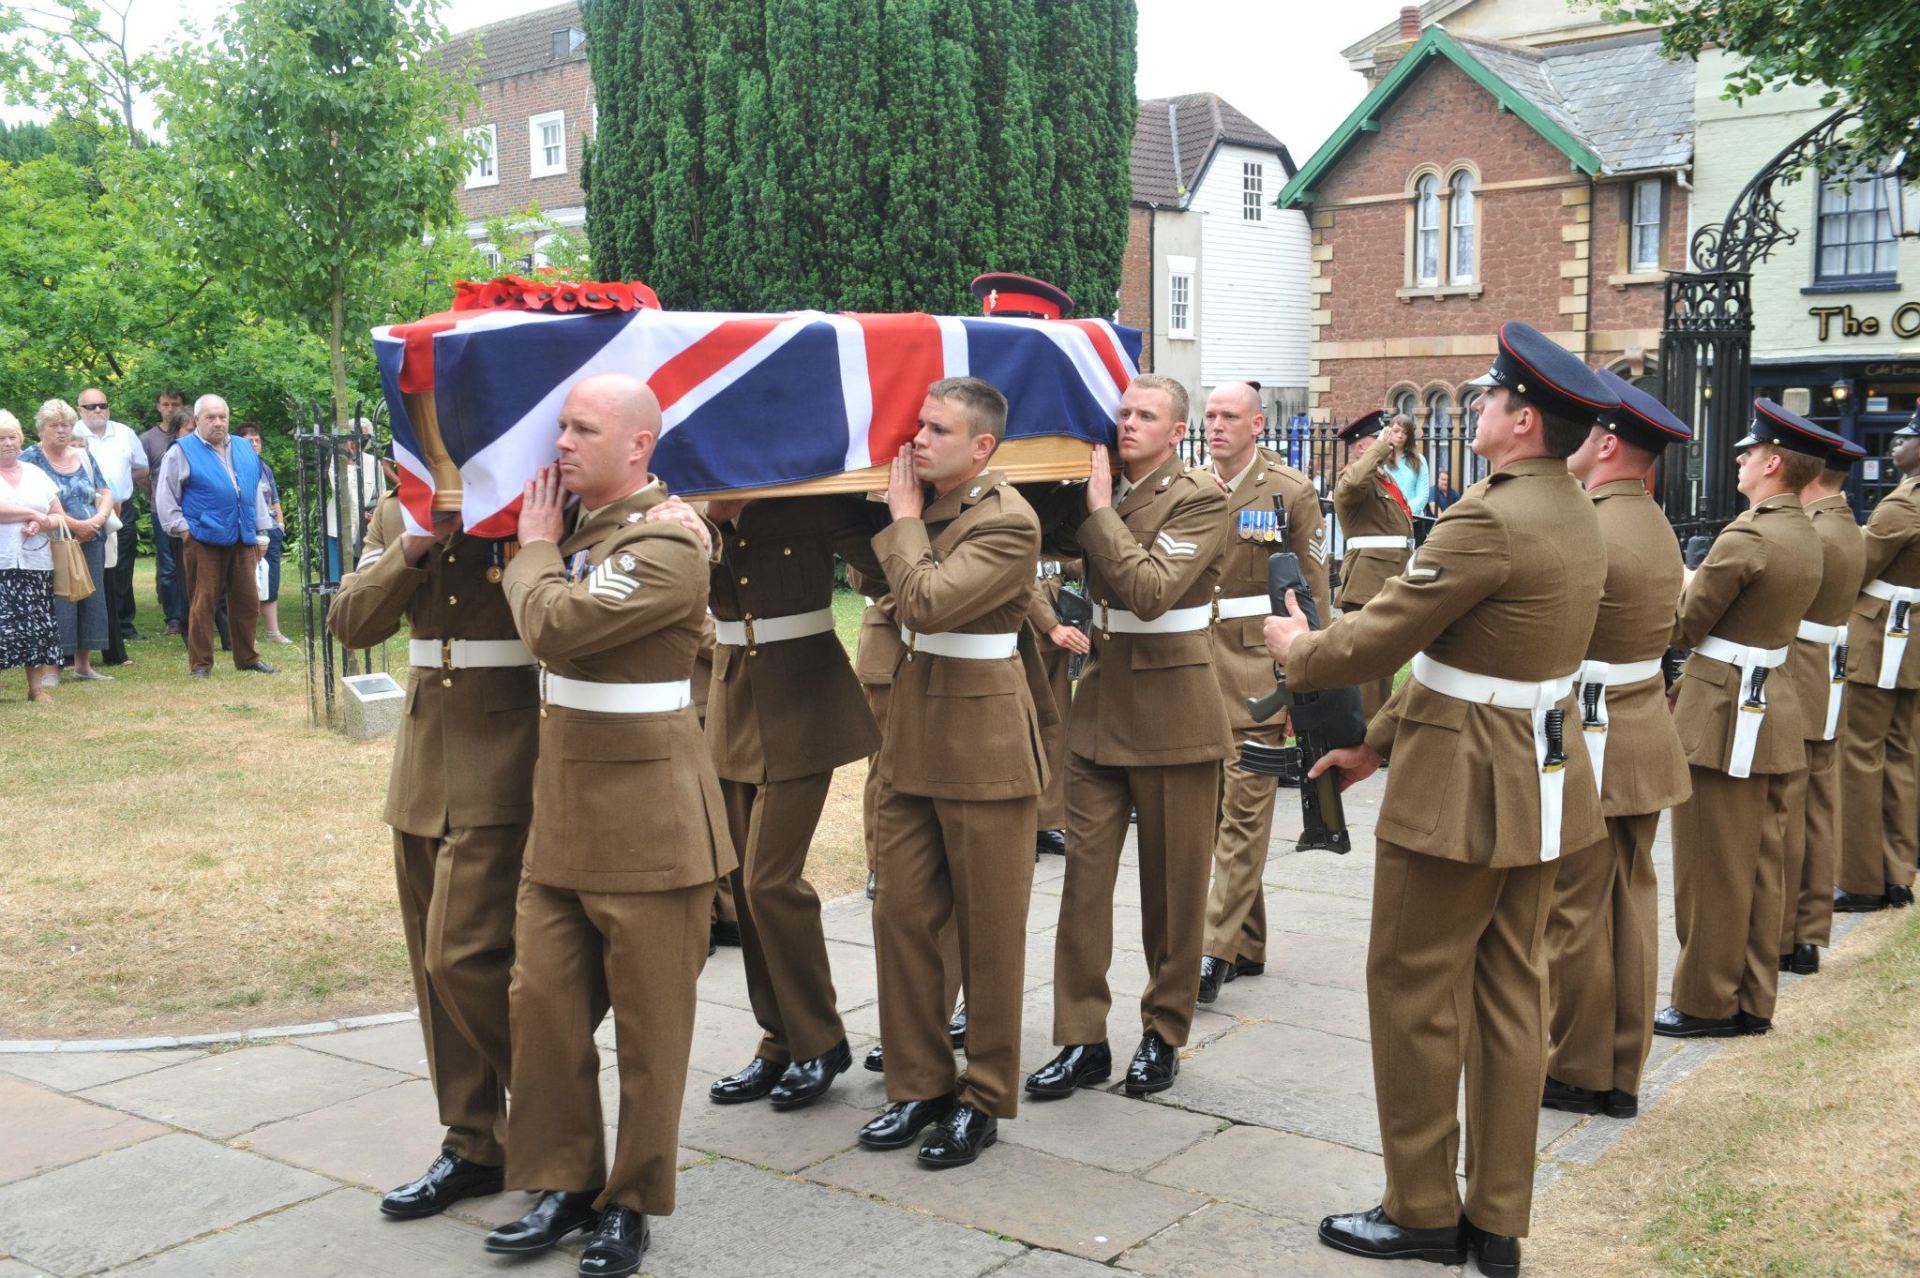 Funeral for a member of the Armed Forces